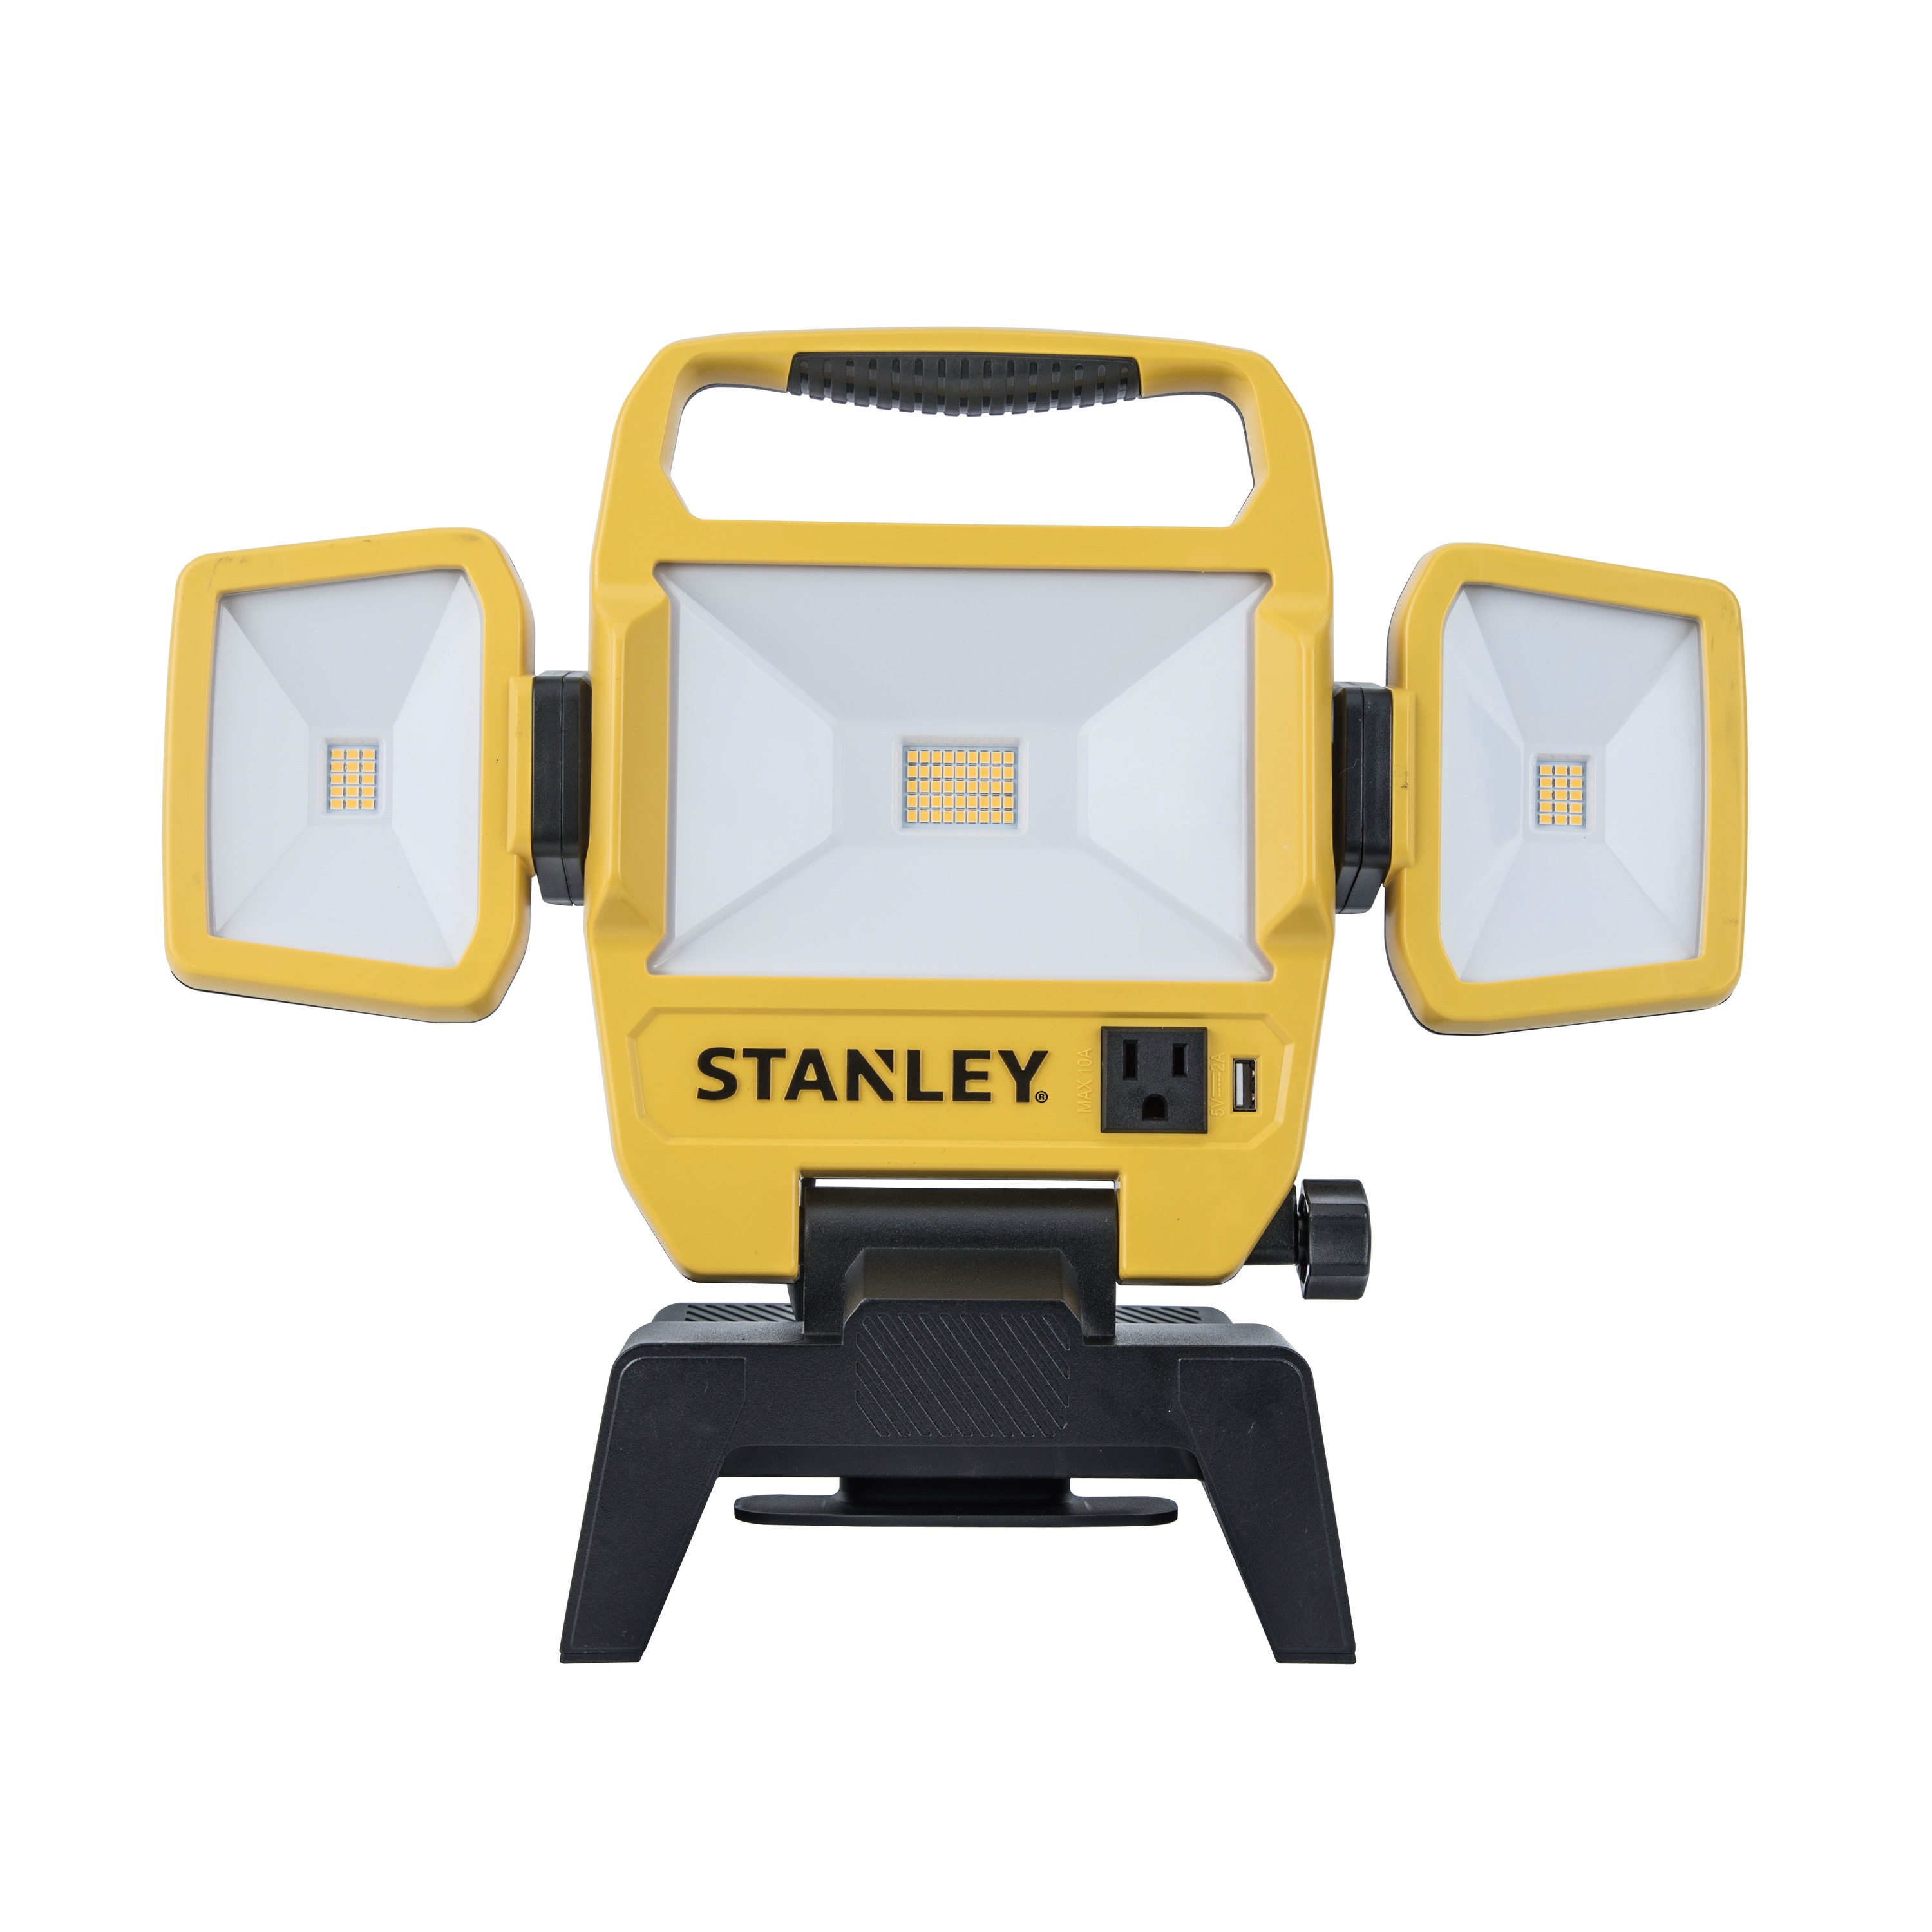 Stanley Tools - 5000 Lumens LED Corded Portable Work Light - 7629103430